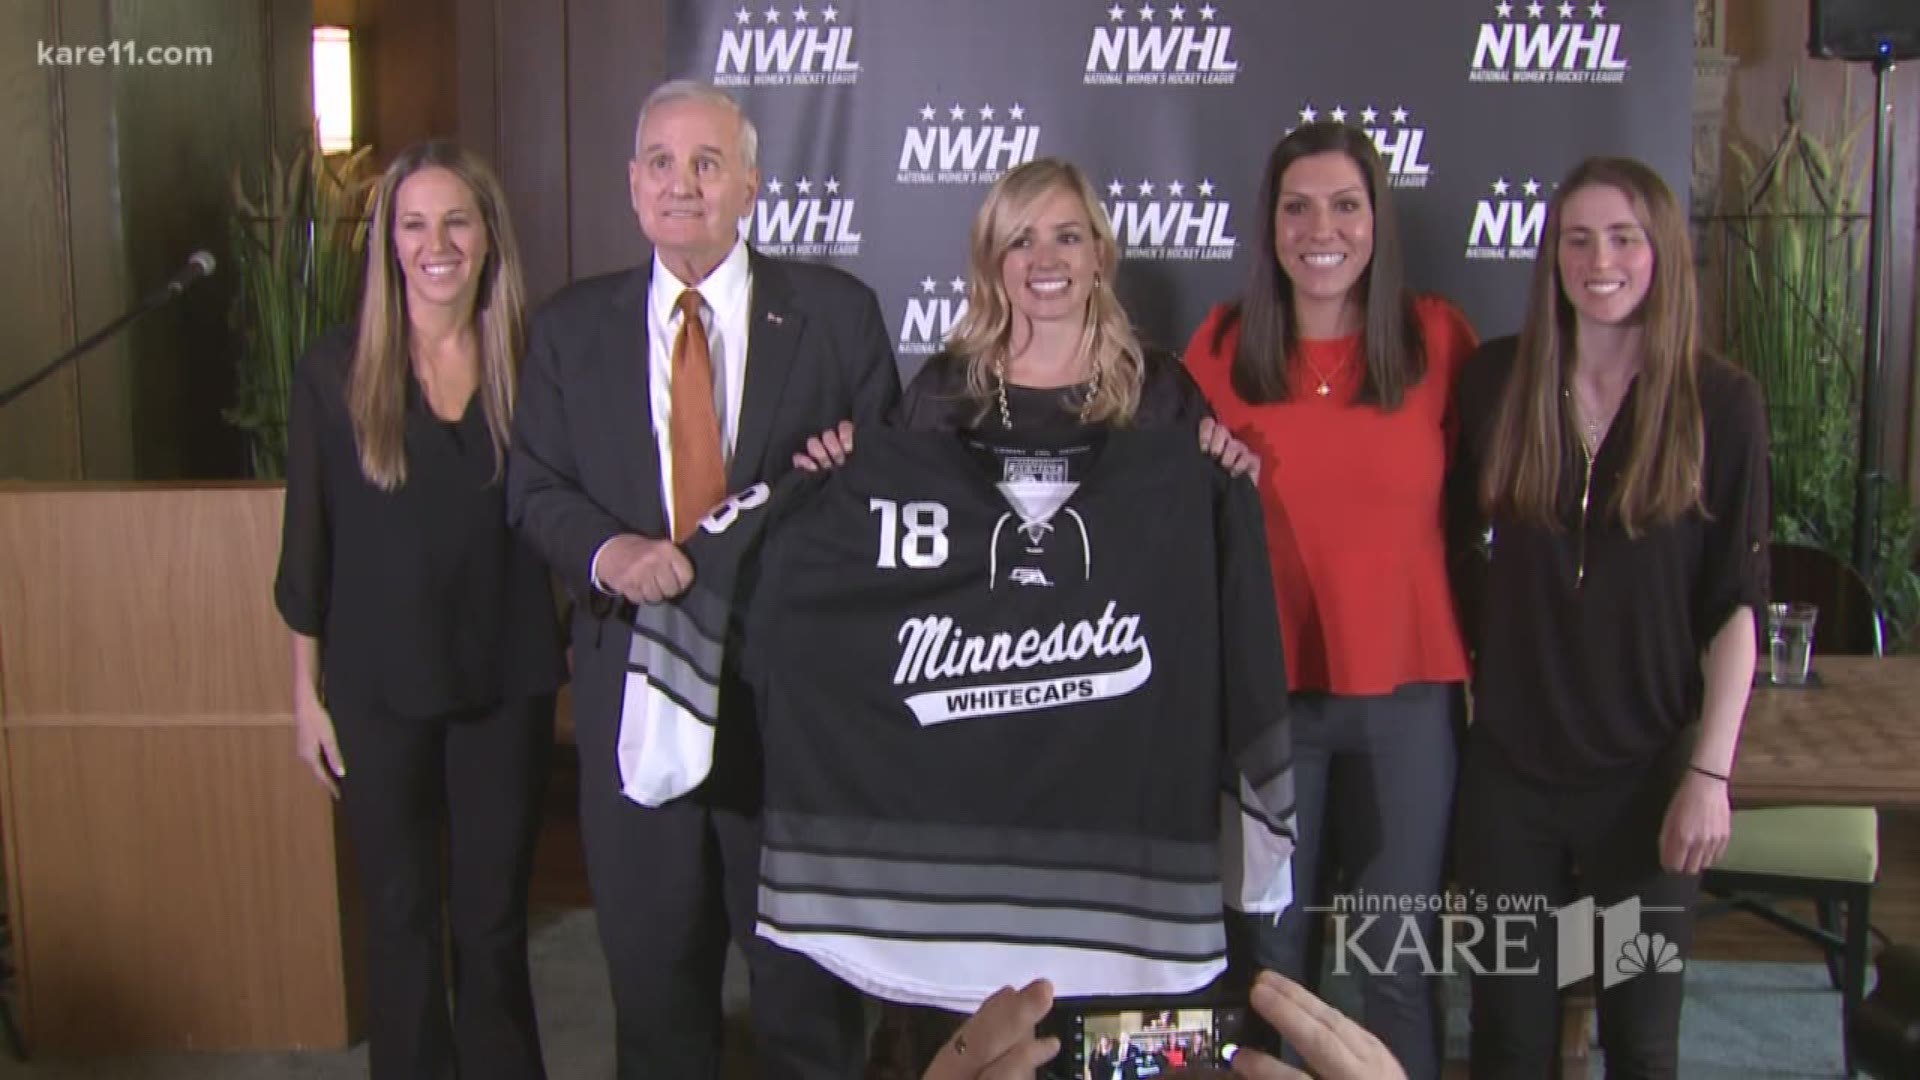 For the three years since it's inception the National Women's Hockey League (NWHL) has operated without a team in the State of Hockey, but on Tuesday that changed with the announcement that the Minnesota Whitecaps have joined for the 2018-19. https://kare